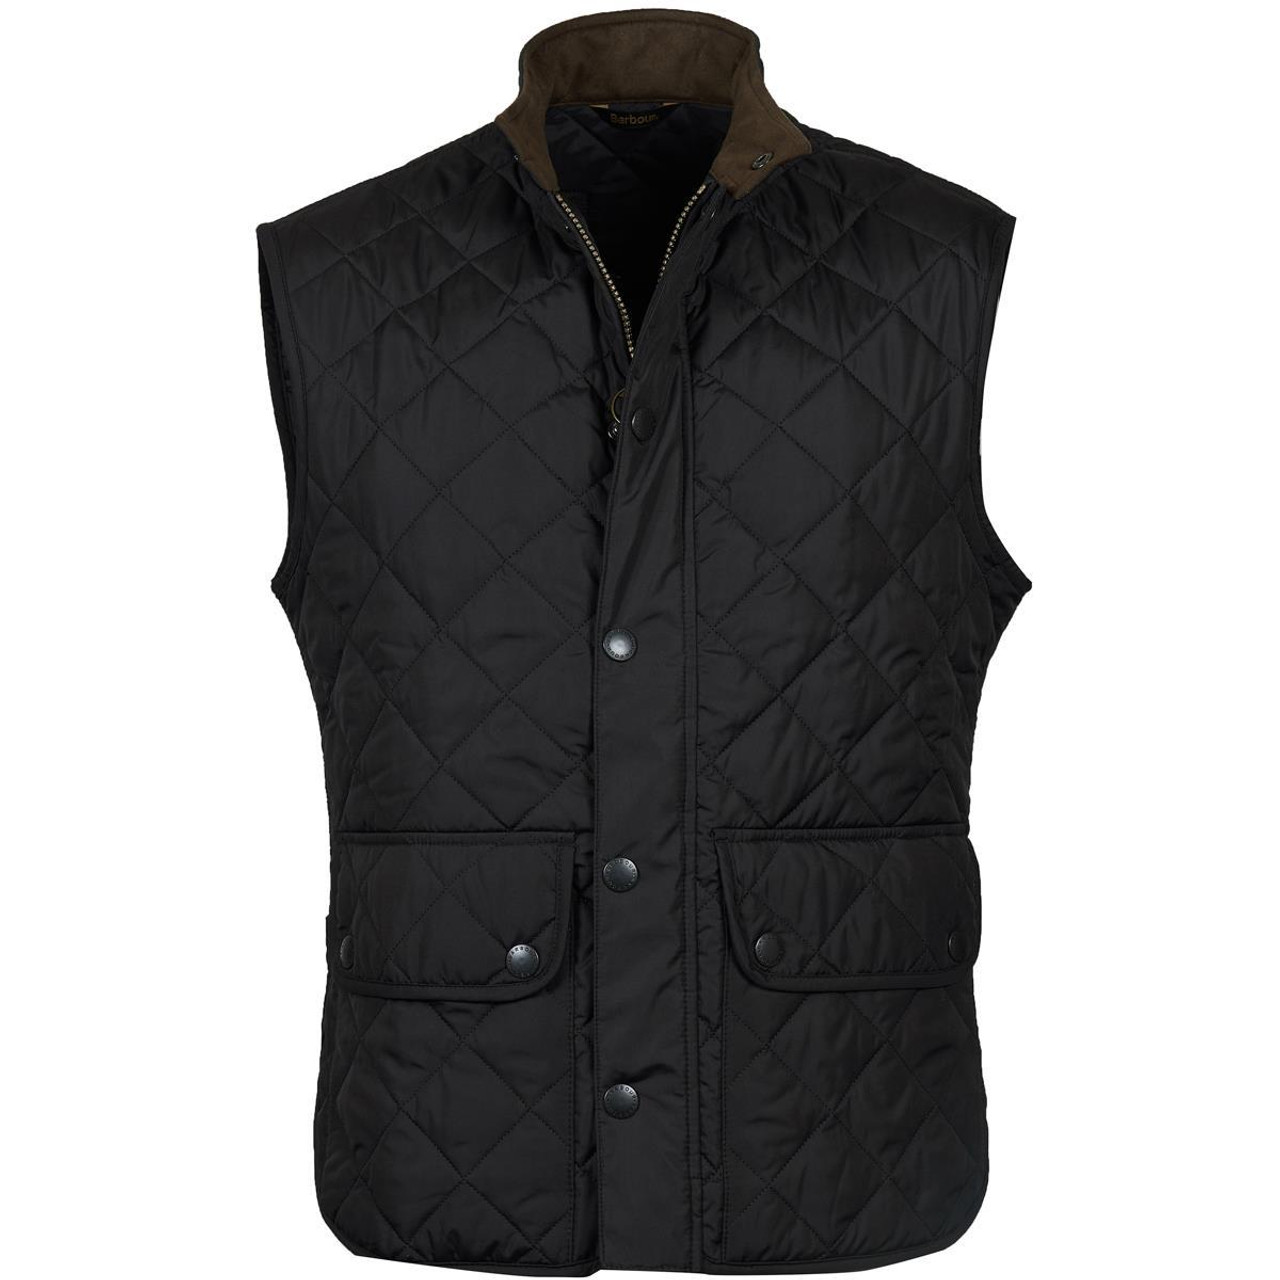 Is the Barbour Lowerdale Gilet suitable for winter weather?